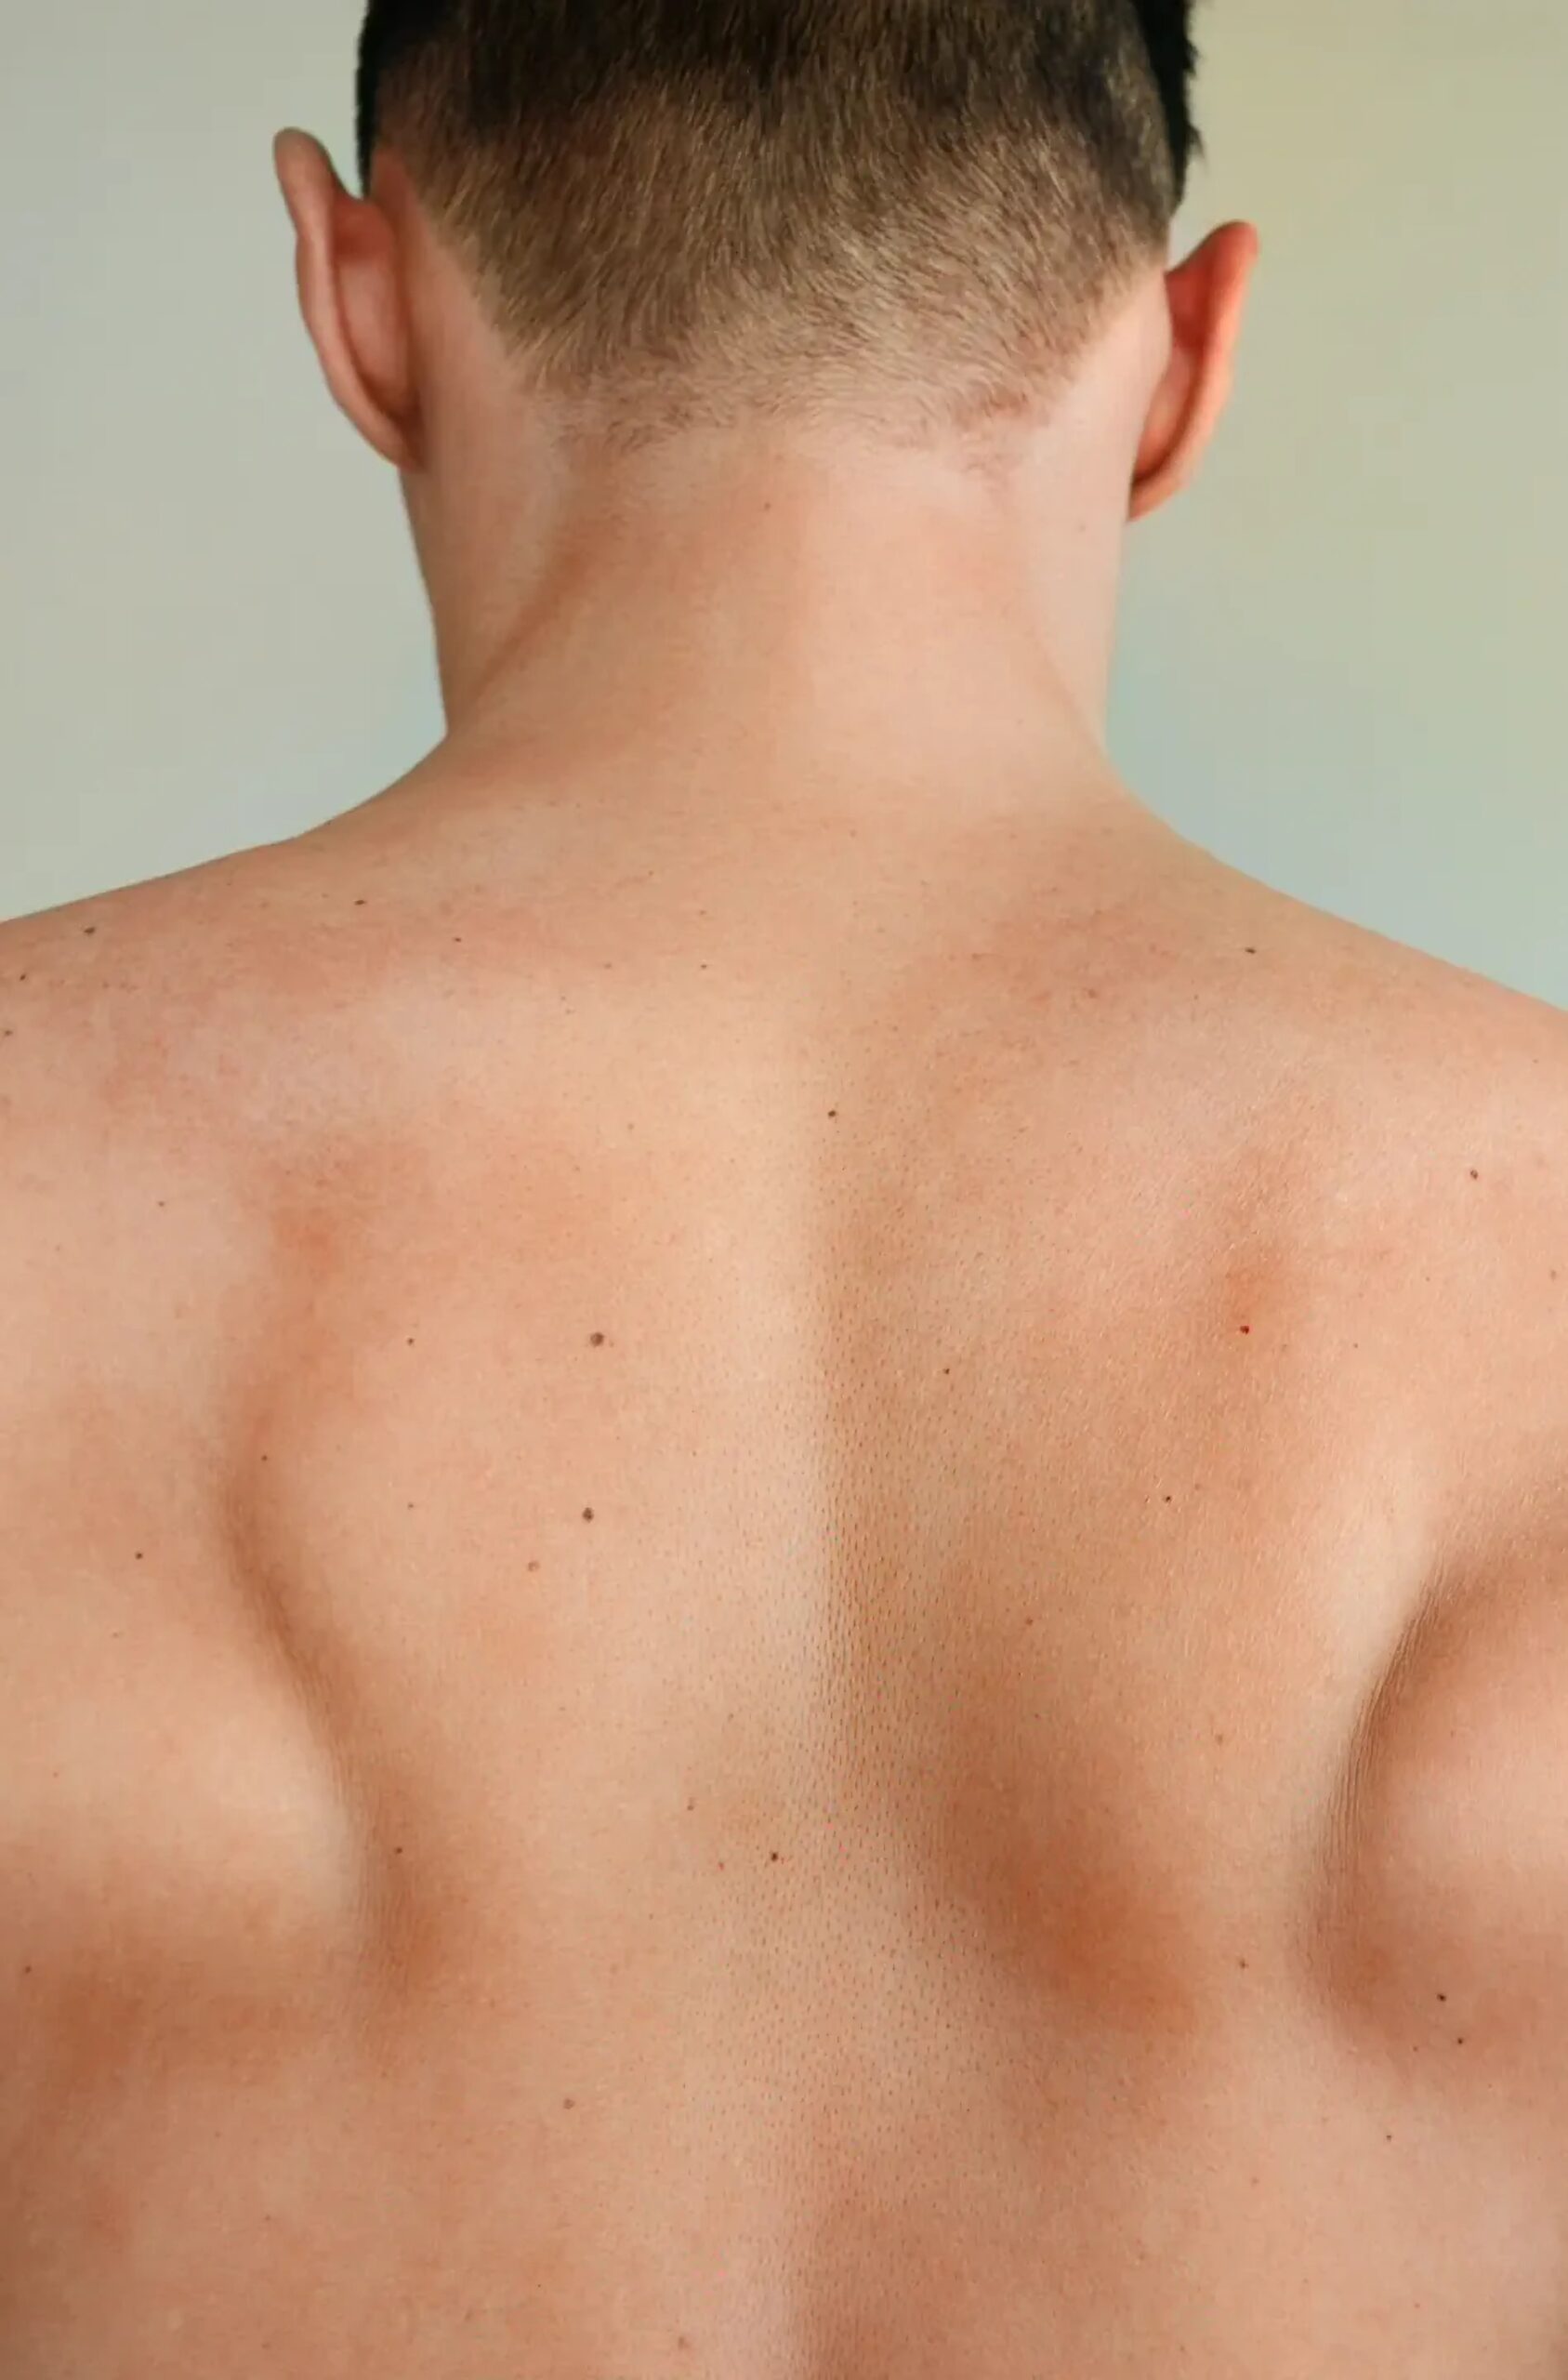 Forward-facing image capturing the back and neck of an individual